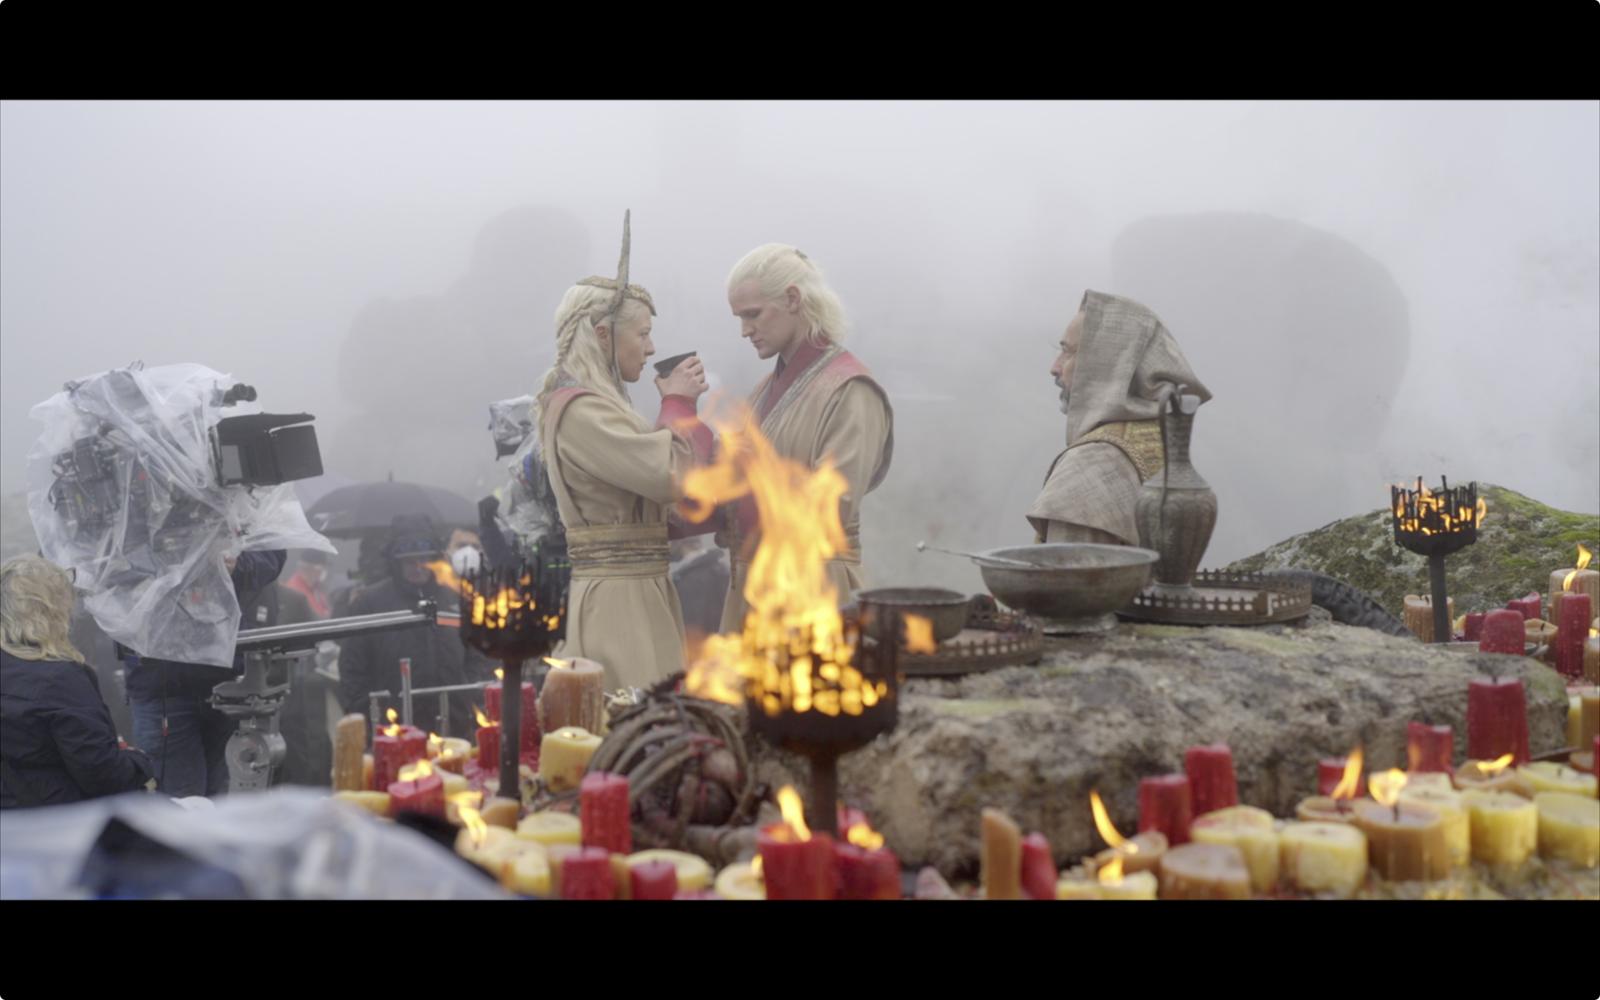 HBO MAX House of the Dragon / Behind the scenes by DOP Pep Bonet / Portugal